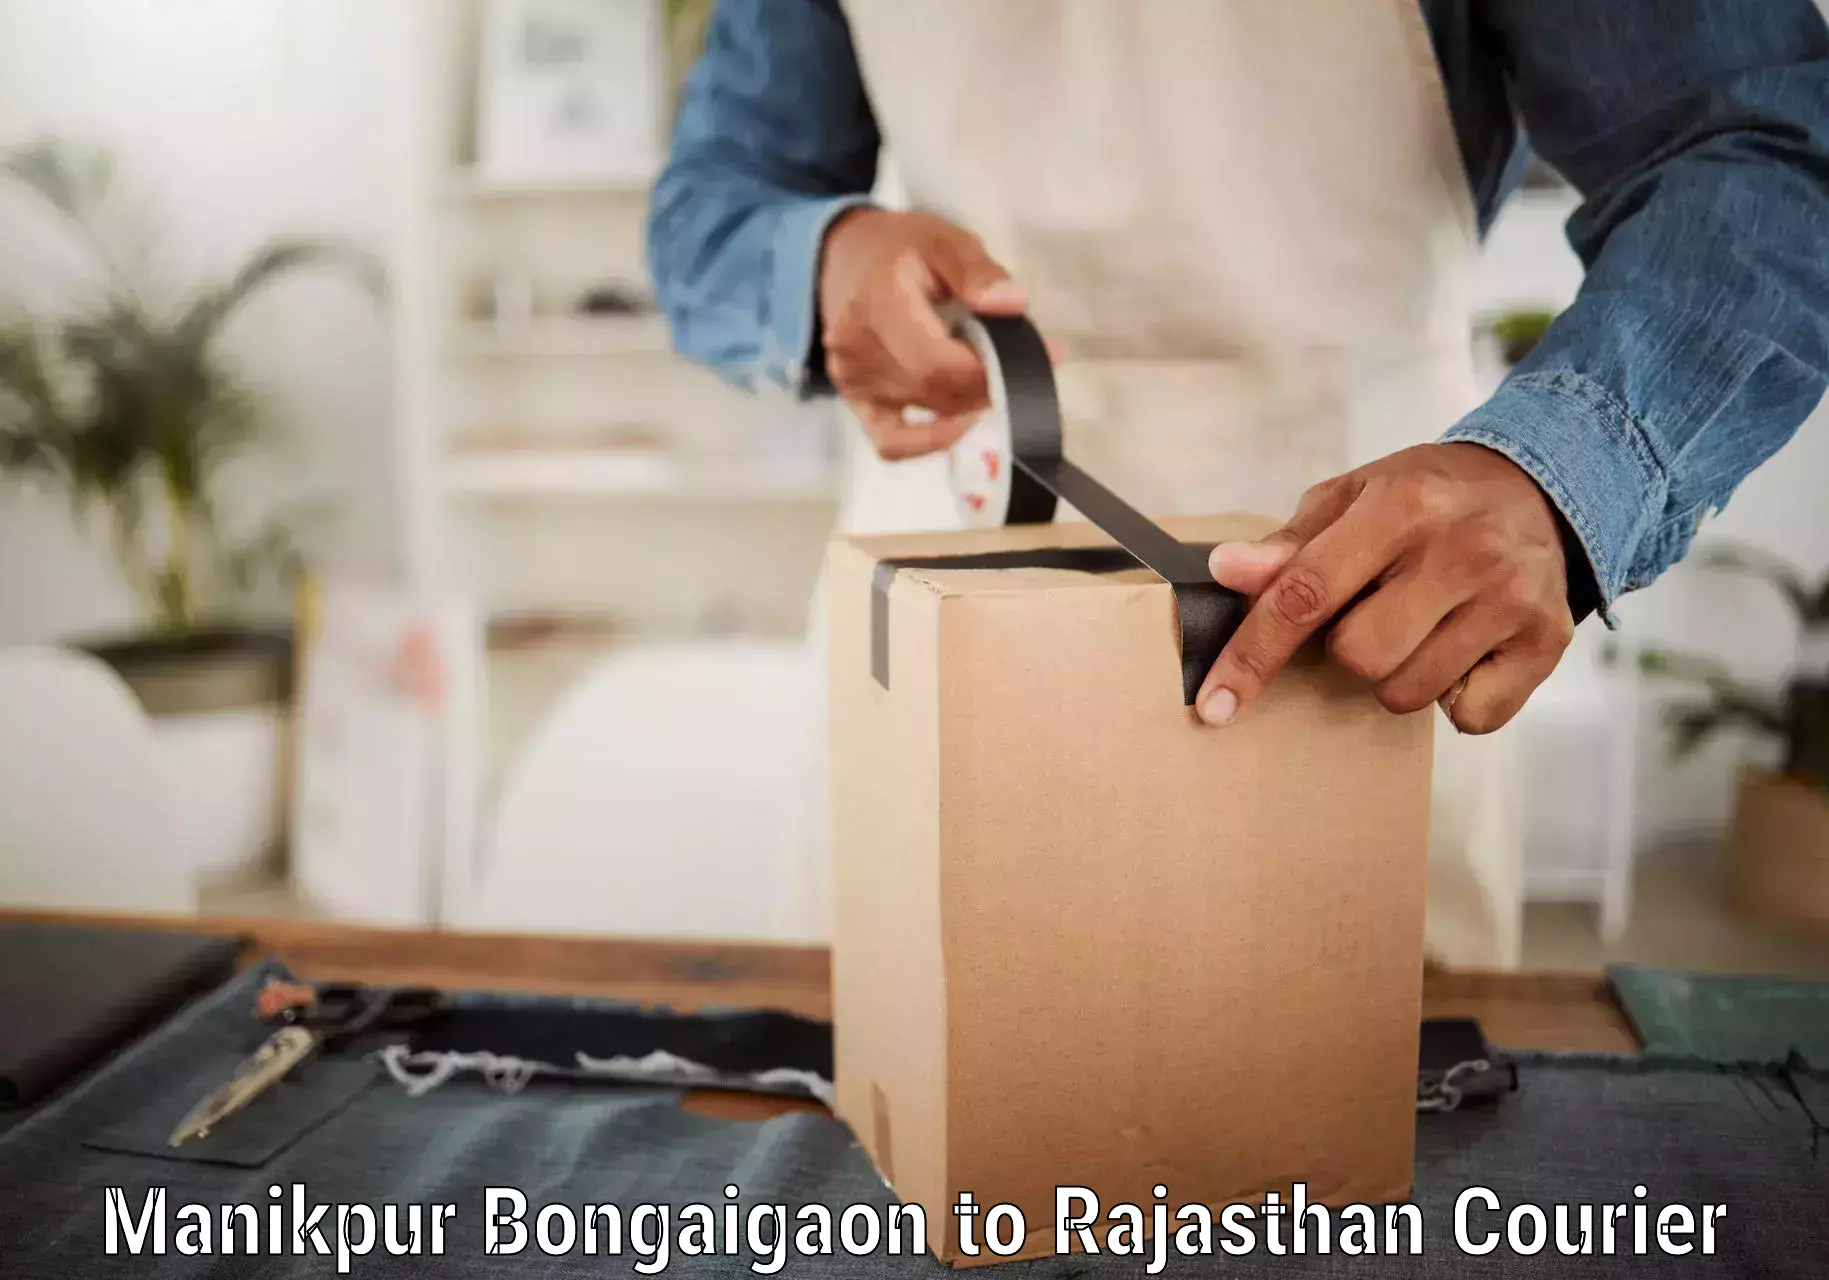 Easy access courier services in Manikpur Bongaigaon to Deogarh Rajsamand